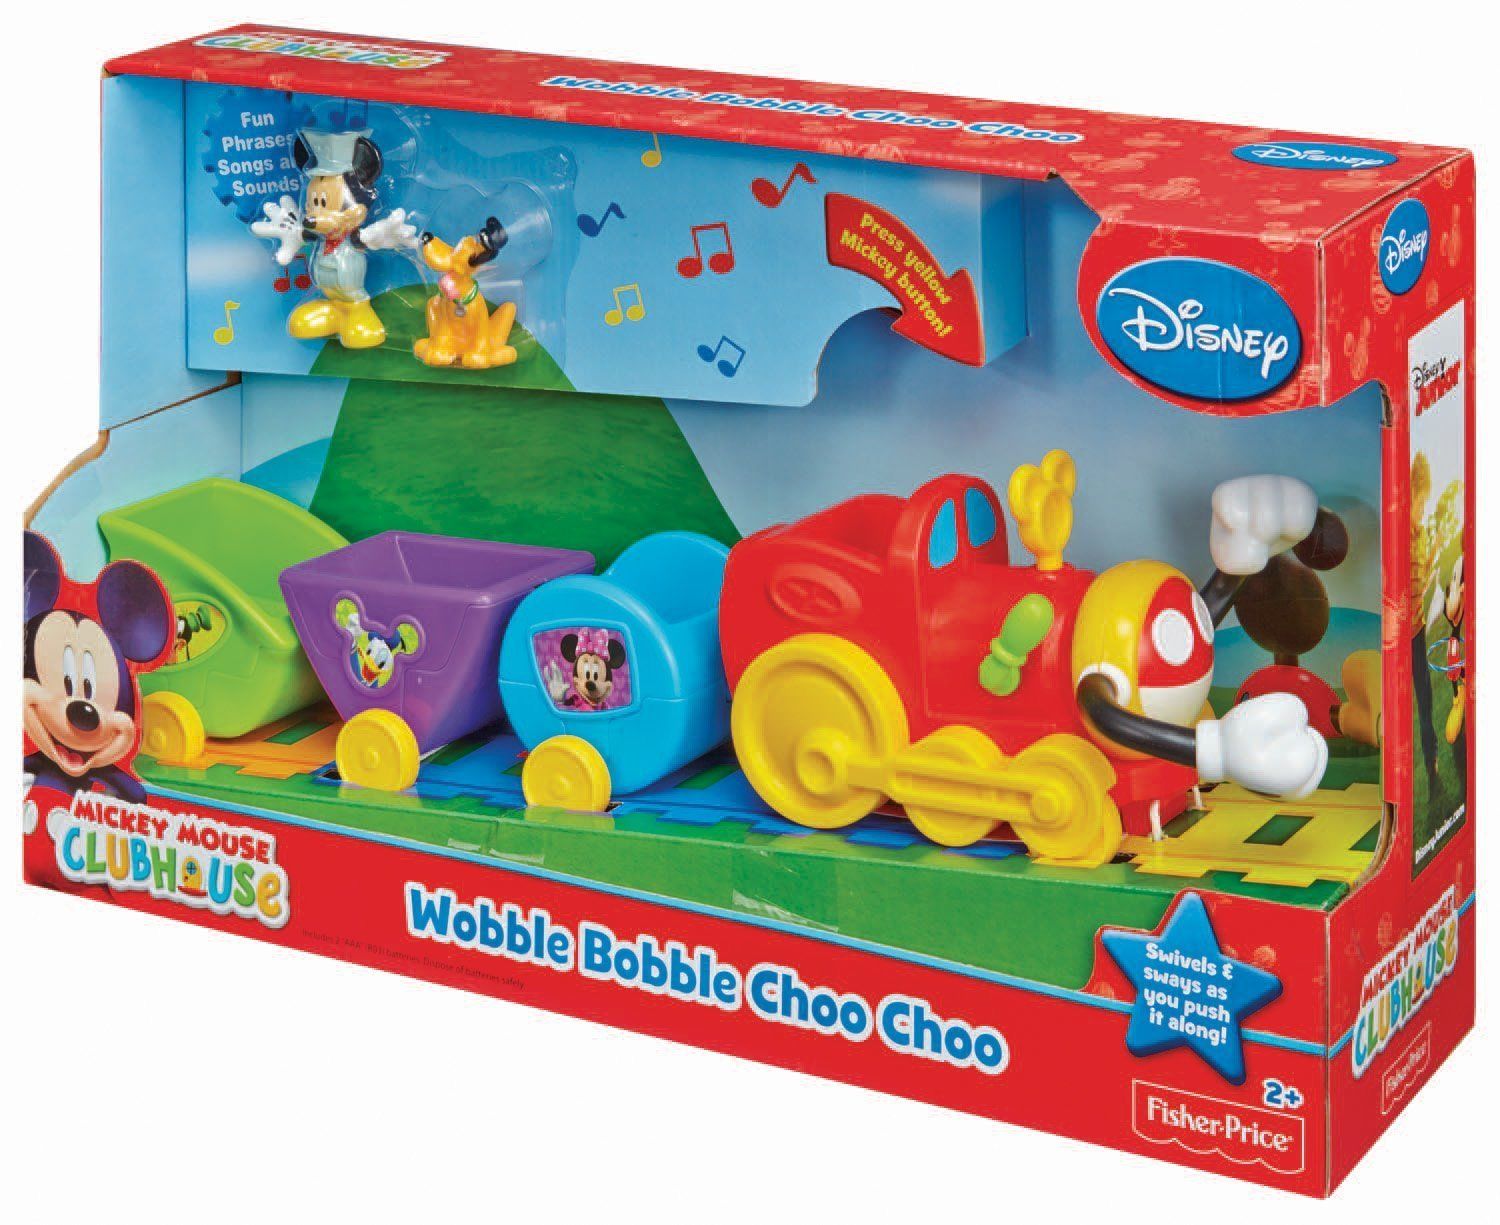 Disney Mickey Mouse Clubhouse Wobble Bobble Choo